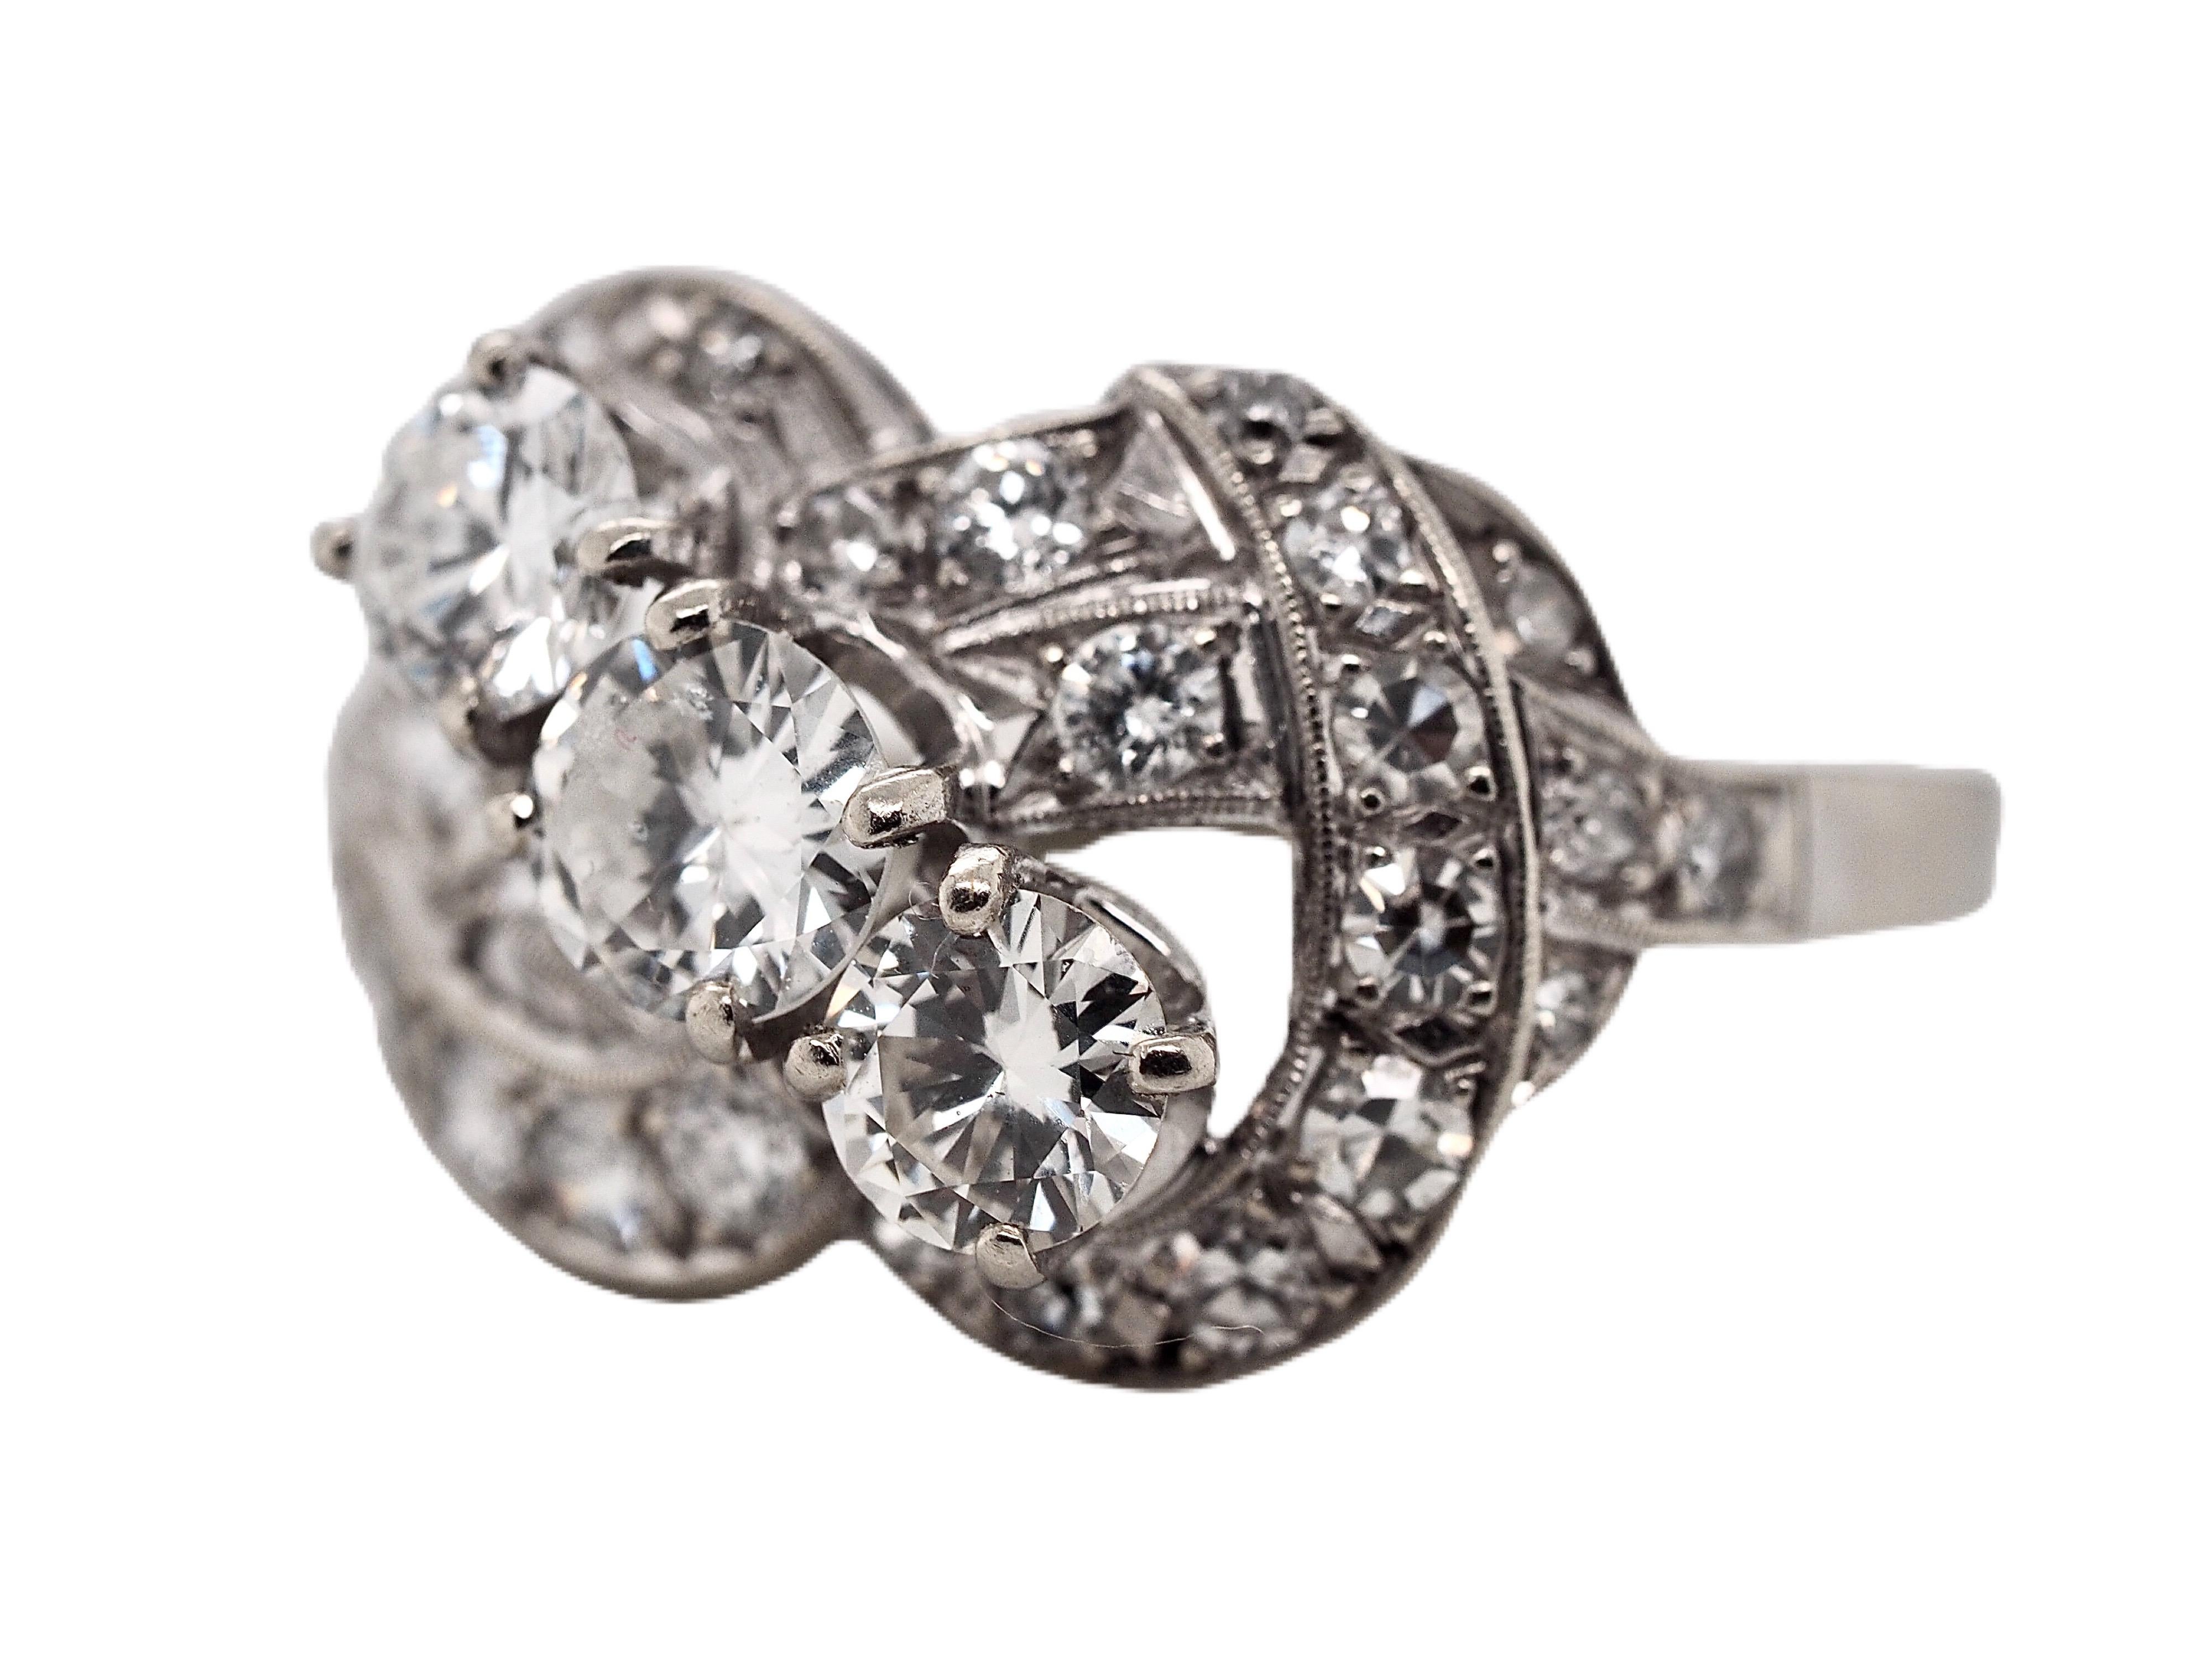 This incredible 14 karat white gold vintage three stone ring dates back to the 1930's. It features three round brilliant cut diamonds diagonally set in four prong settings, weighing approximately 1.07 carats total. The center diamonds are accented